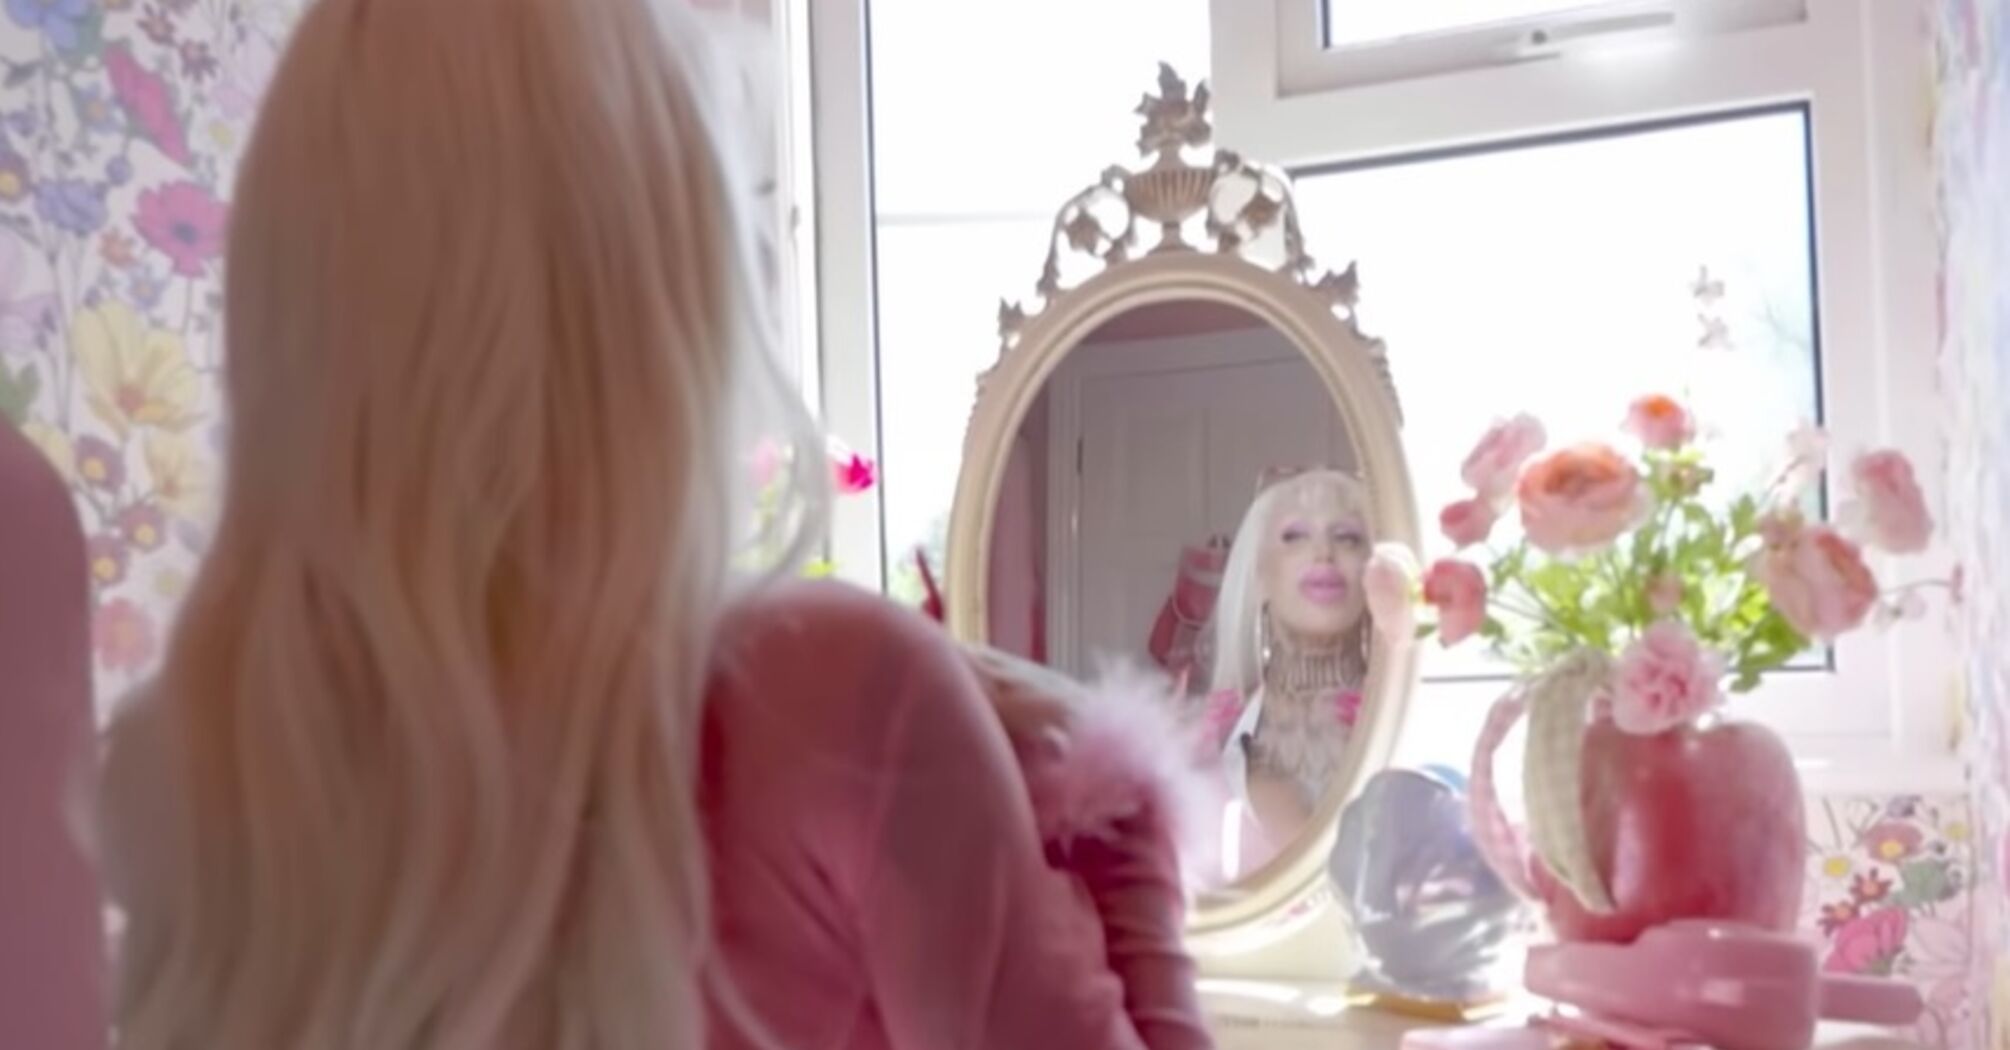 Woman spent $130,000 to look like Barbie: before and after photos